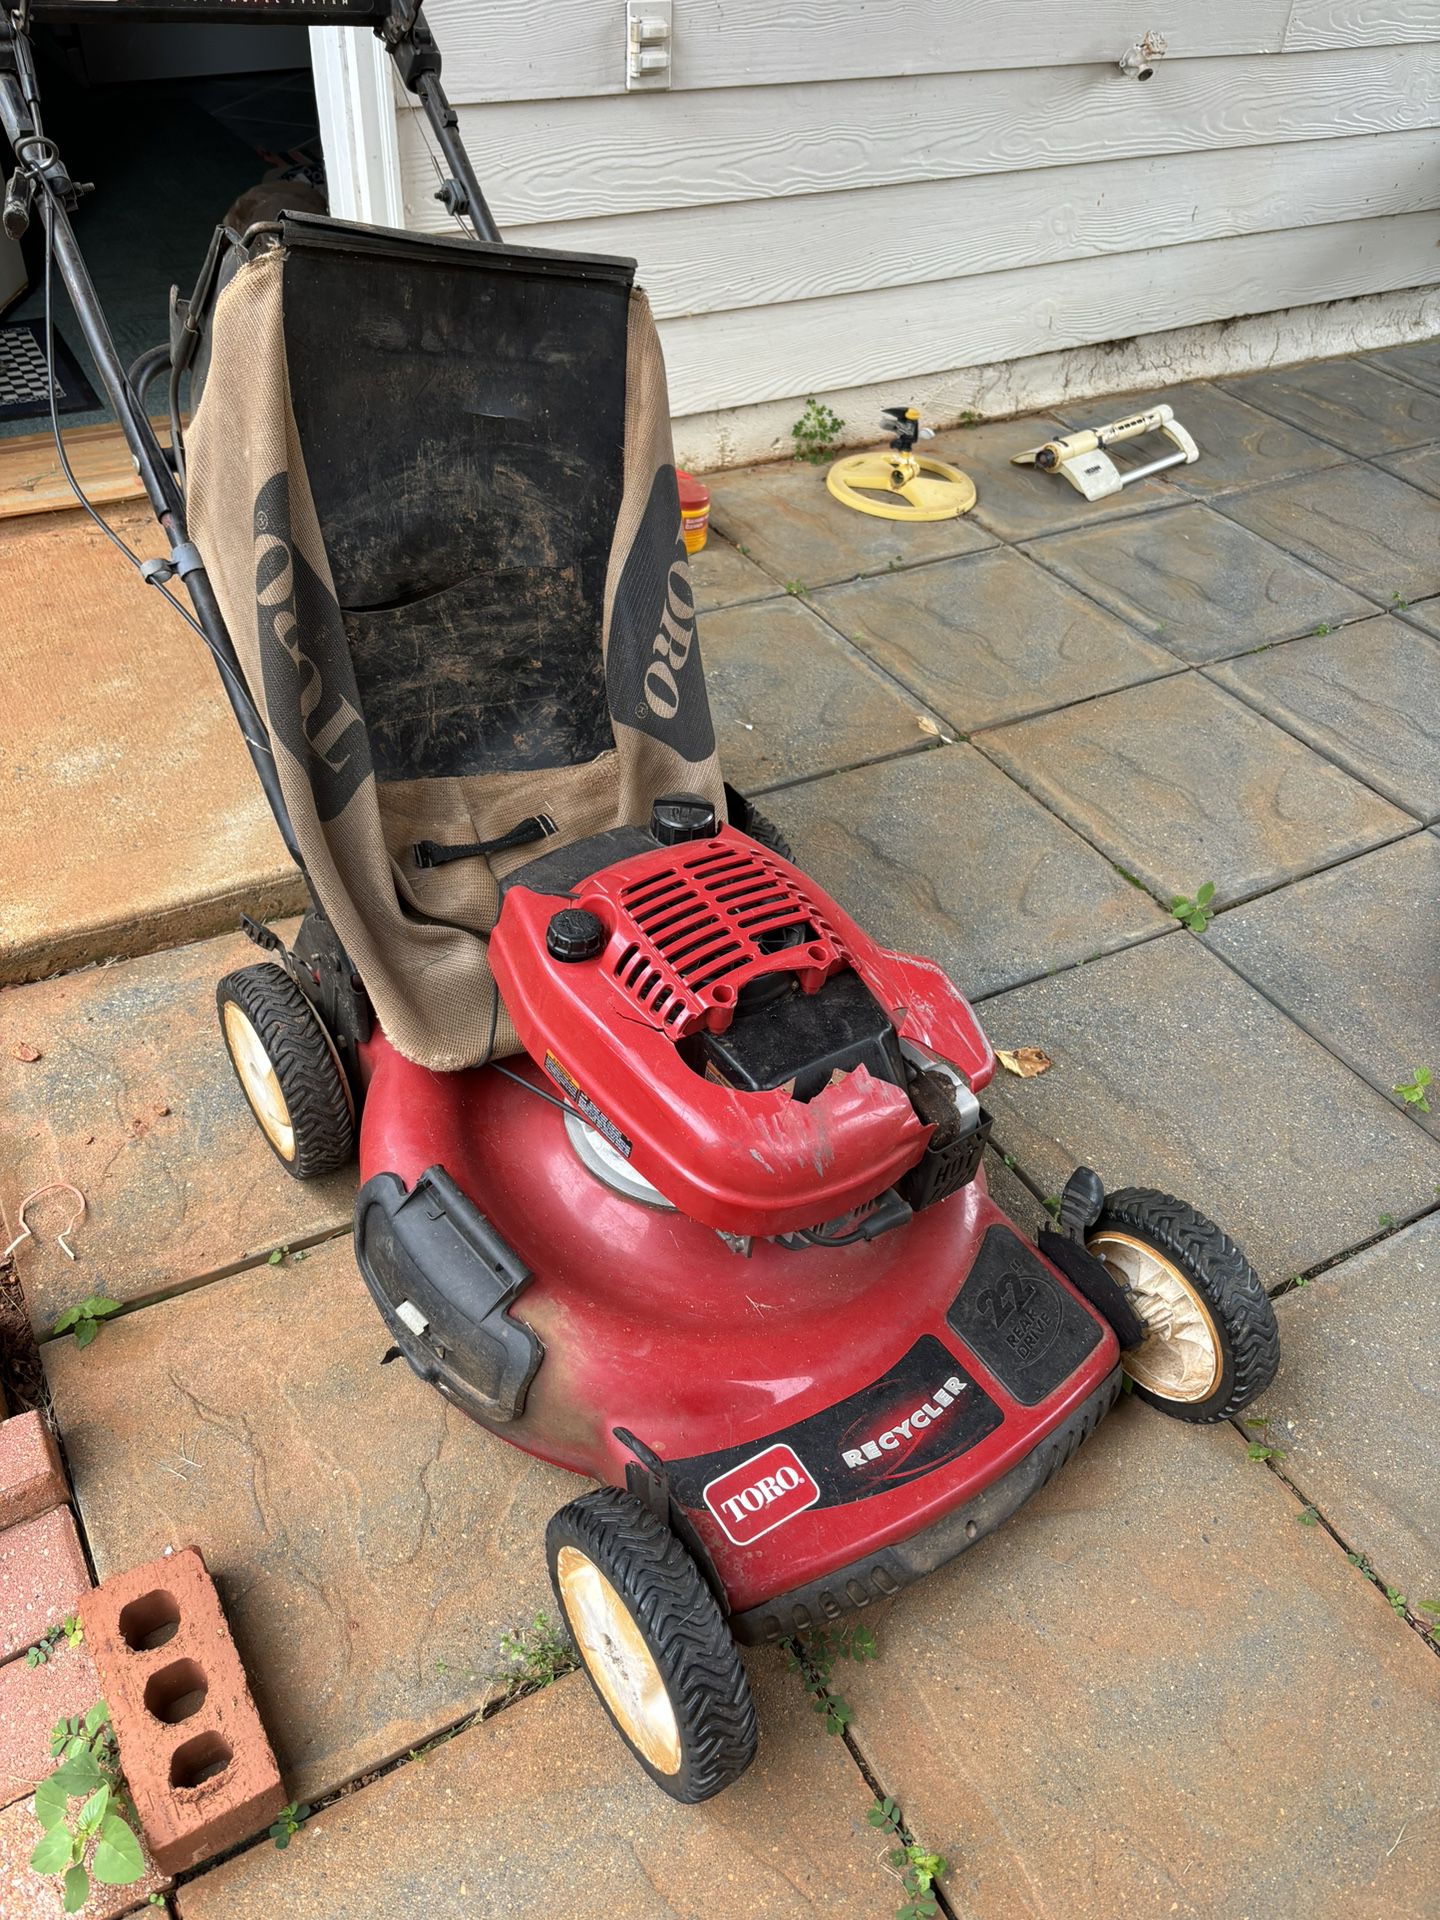 Toro Lawn Mower Works Great, Well Maintained Engine 10 Years Old Hence Worn Bag And Busted Front Frame 